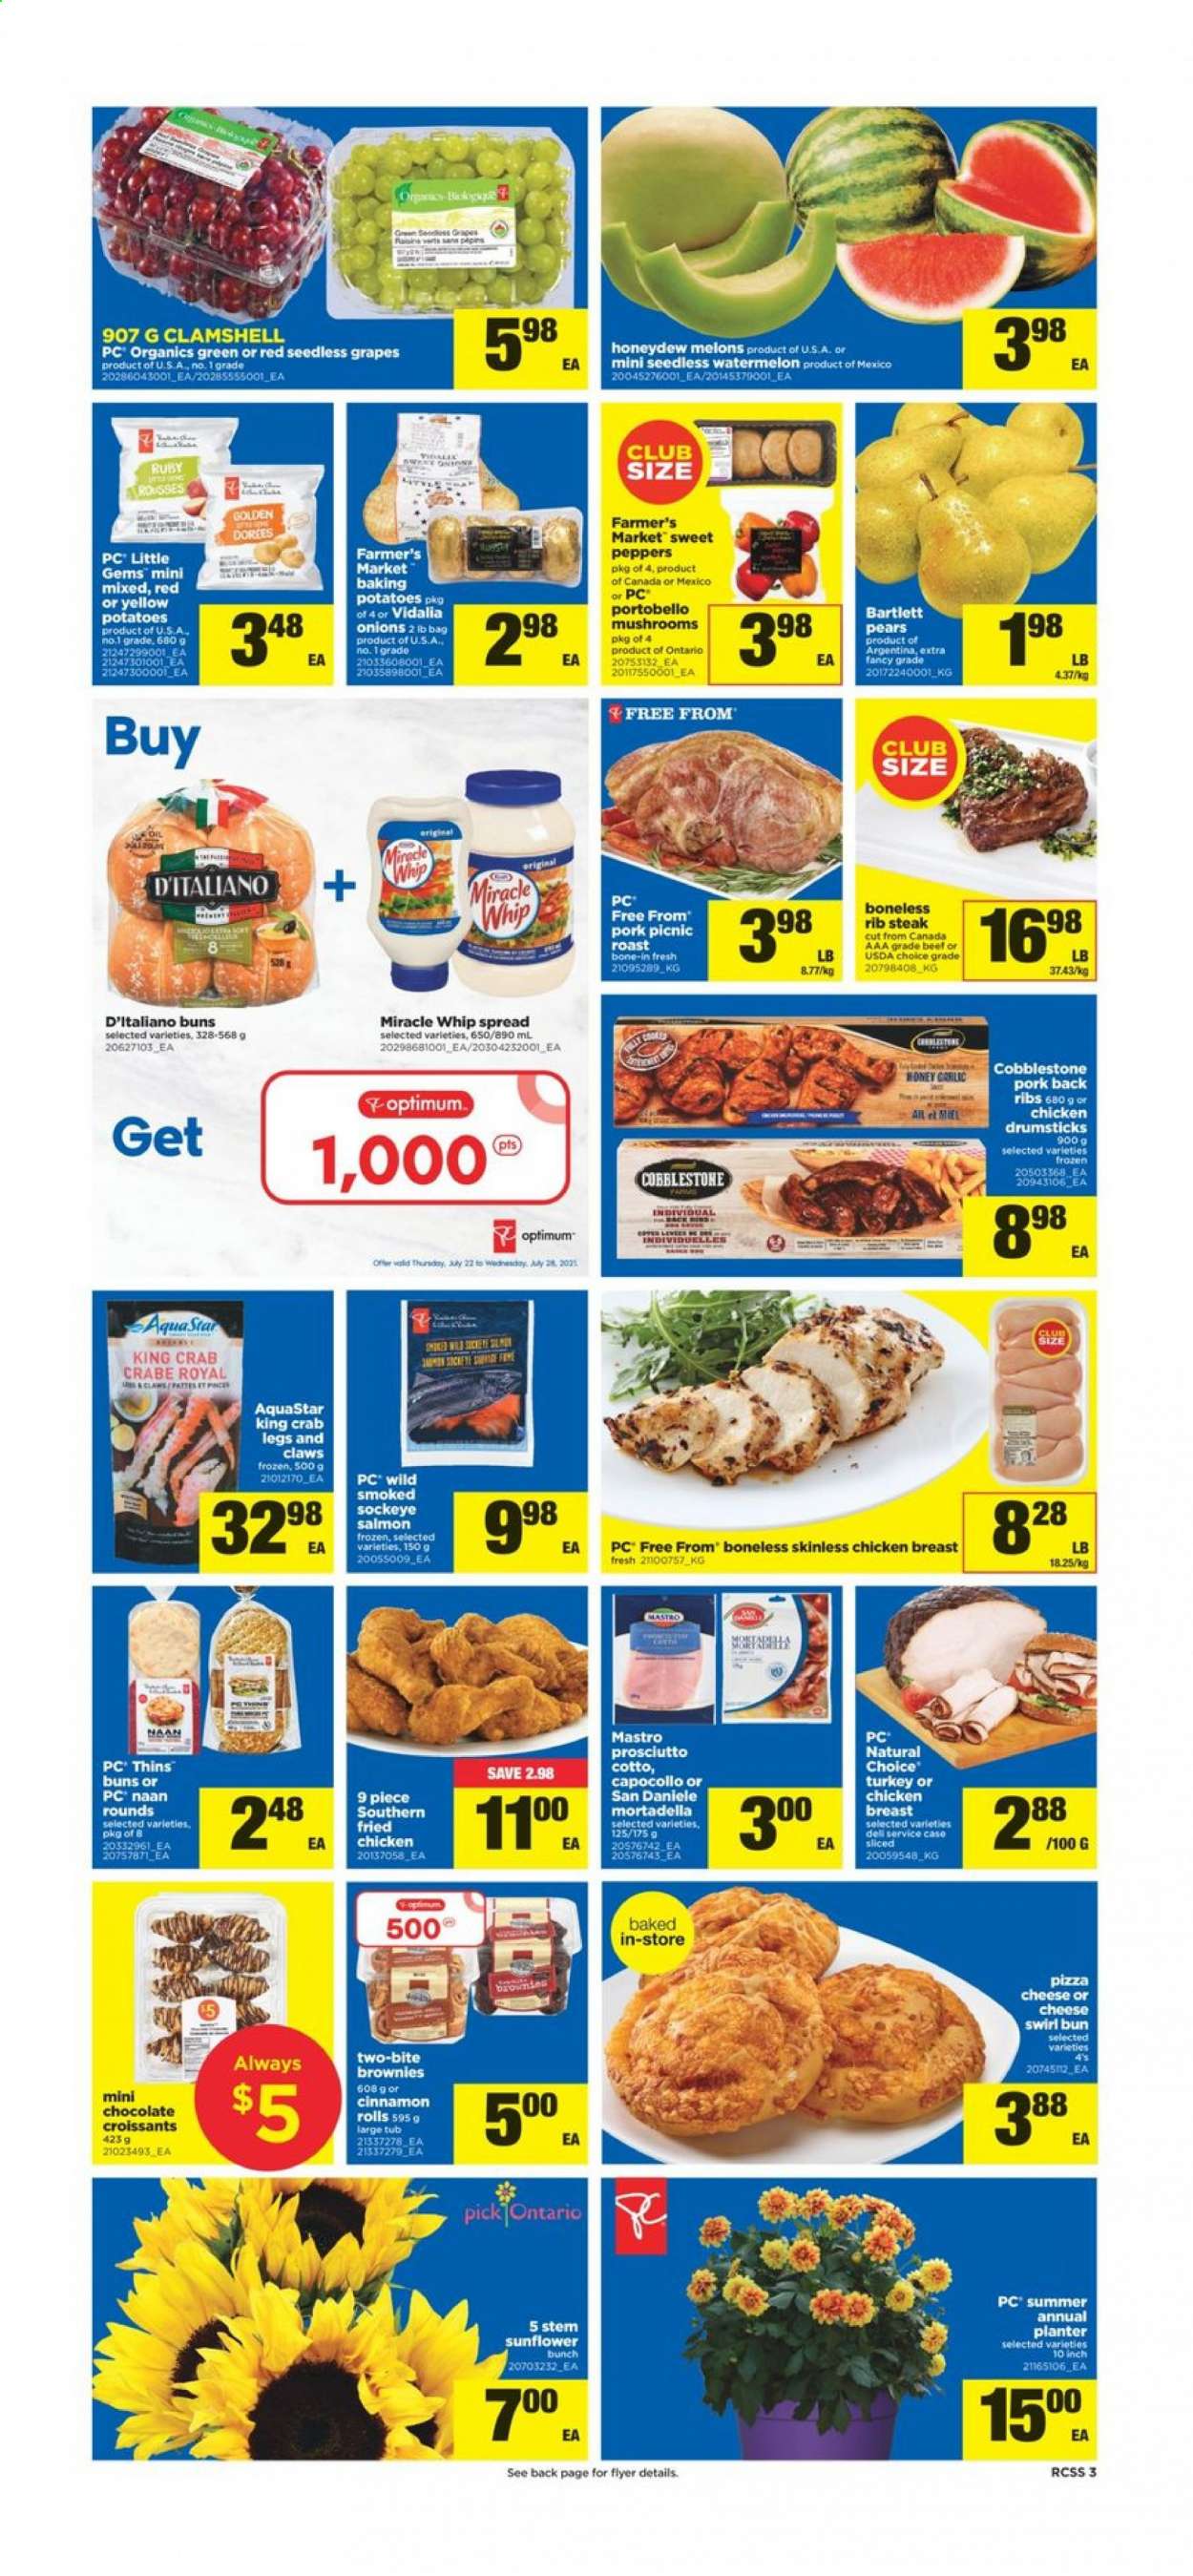 thumbnail - Real Canadian Superstore Flyer - July 22, 2021 - July 28, 2021 - Sales products - portobello mushrooms, croissant, buns, cinnamon roll, brownies, sweet peppers, potatoes, onion, peppers, grapes, seedless grapes, watermelon, honeydew, pears, melons, salmon, king crab, crab legs, crab, pizza, fried chicken, mortadella, prosciutto, Miracle Whip, chocolate, Thins, honey, chicken breasts, chicken drumsticks, chicken, Optimum, sunflower, steak. Page 3.